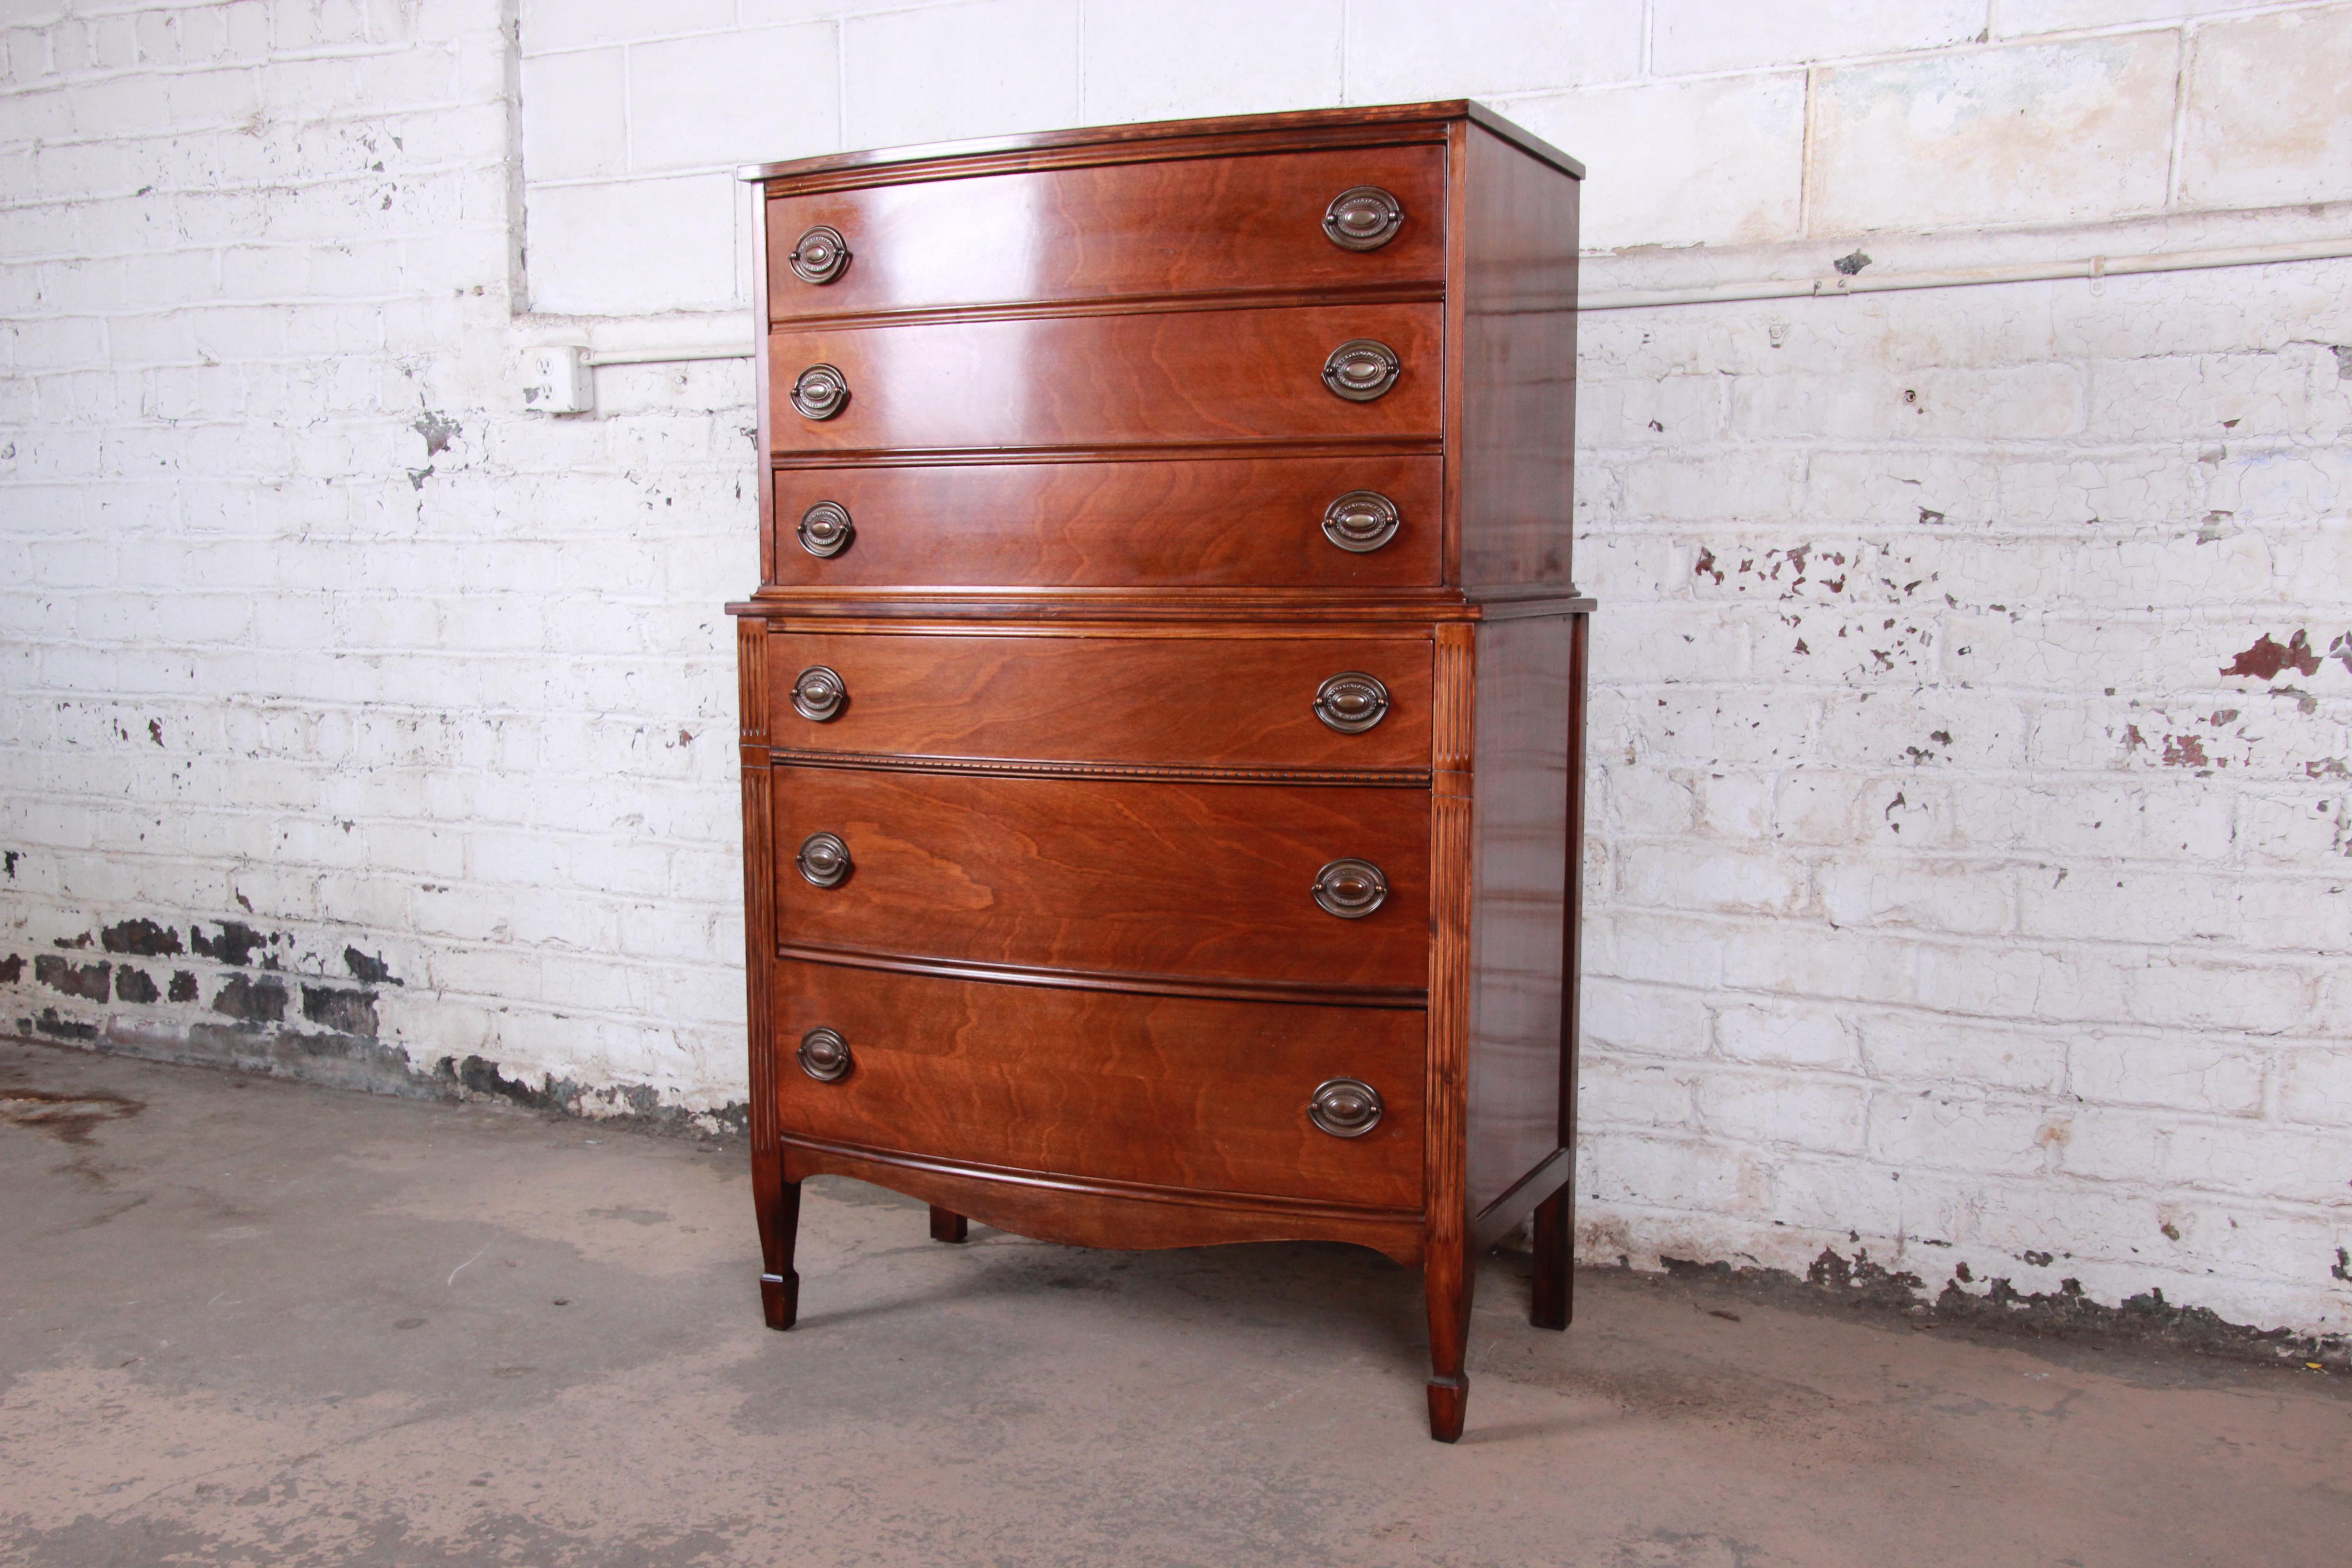 A very nice vintage Federal style mahogany highboy dresser. The dresser features gorgeous mahogany wood grain and a classic traditional style. It offers ample storage, with six deep dovetailed drawers. All hardware is original. The dresser is in